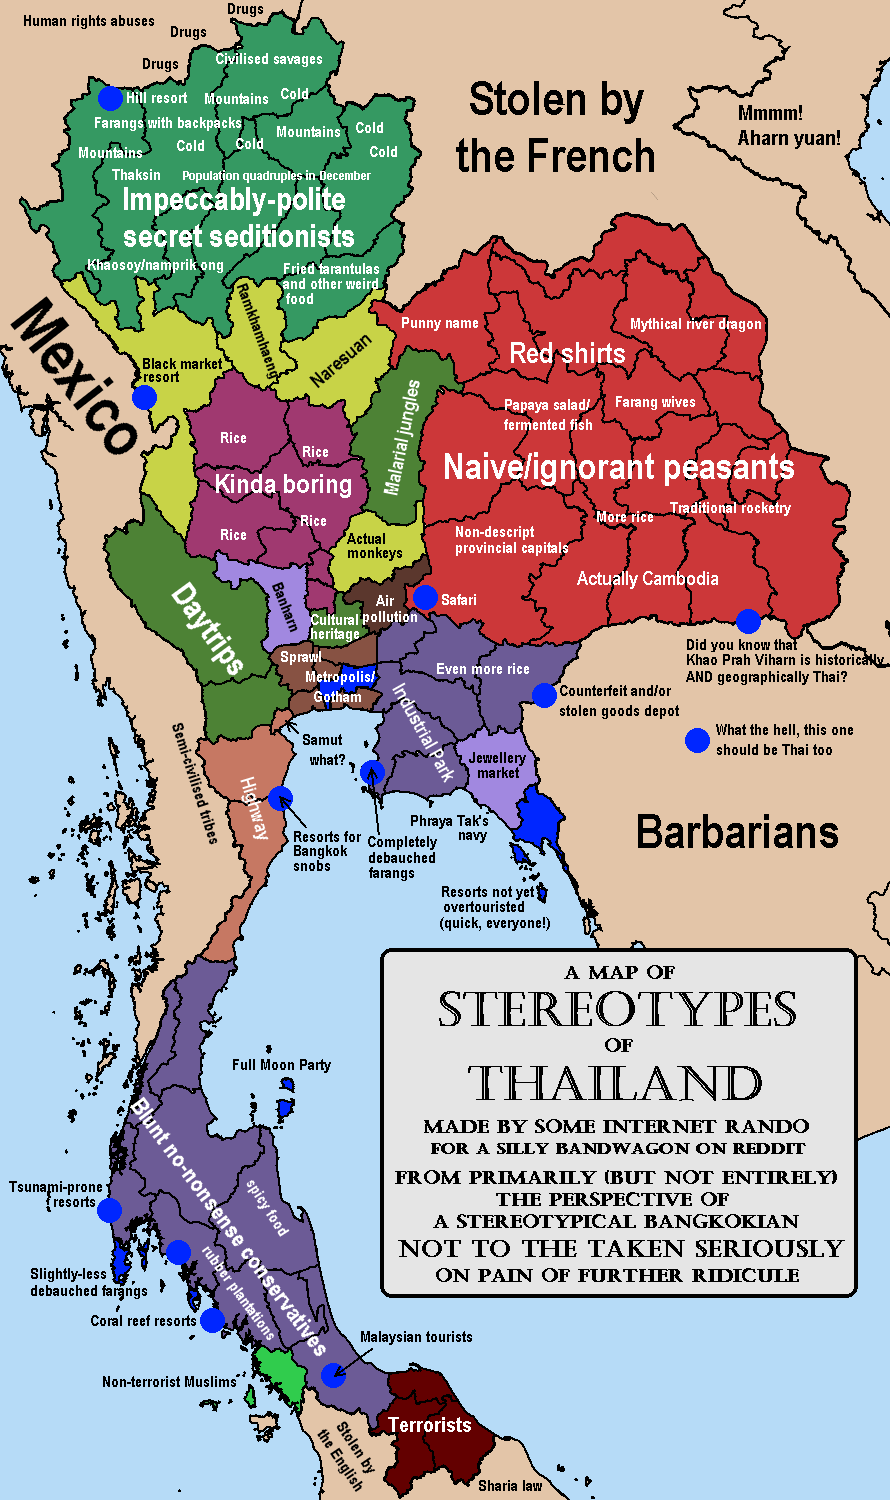 Stereotypes of Thailand